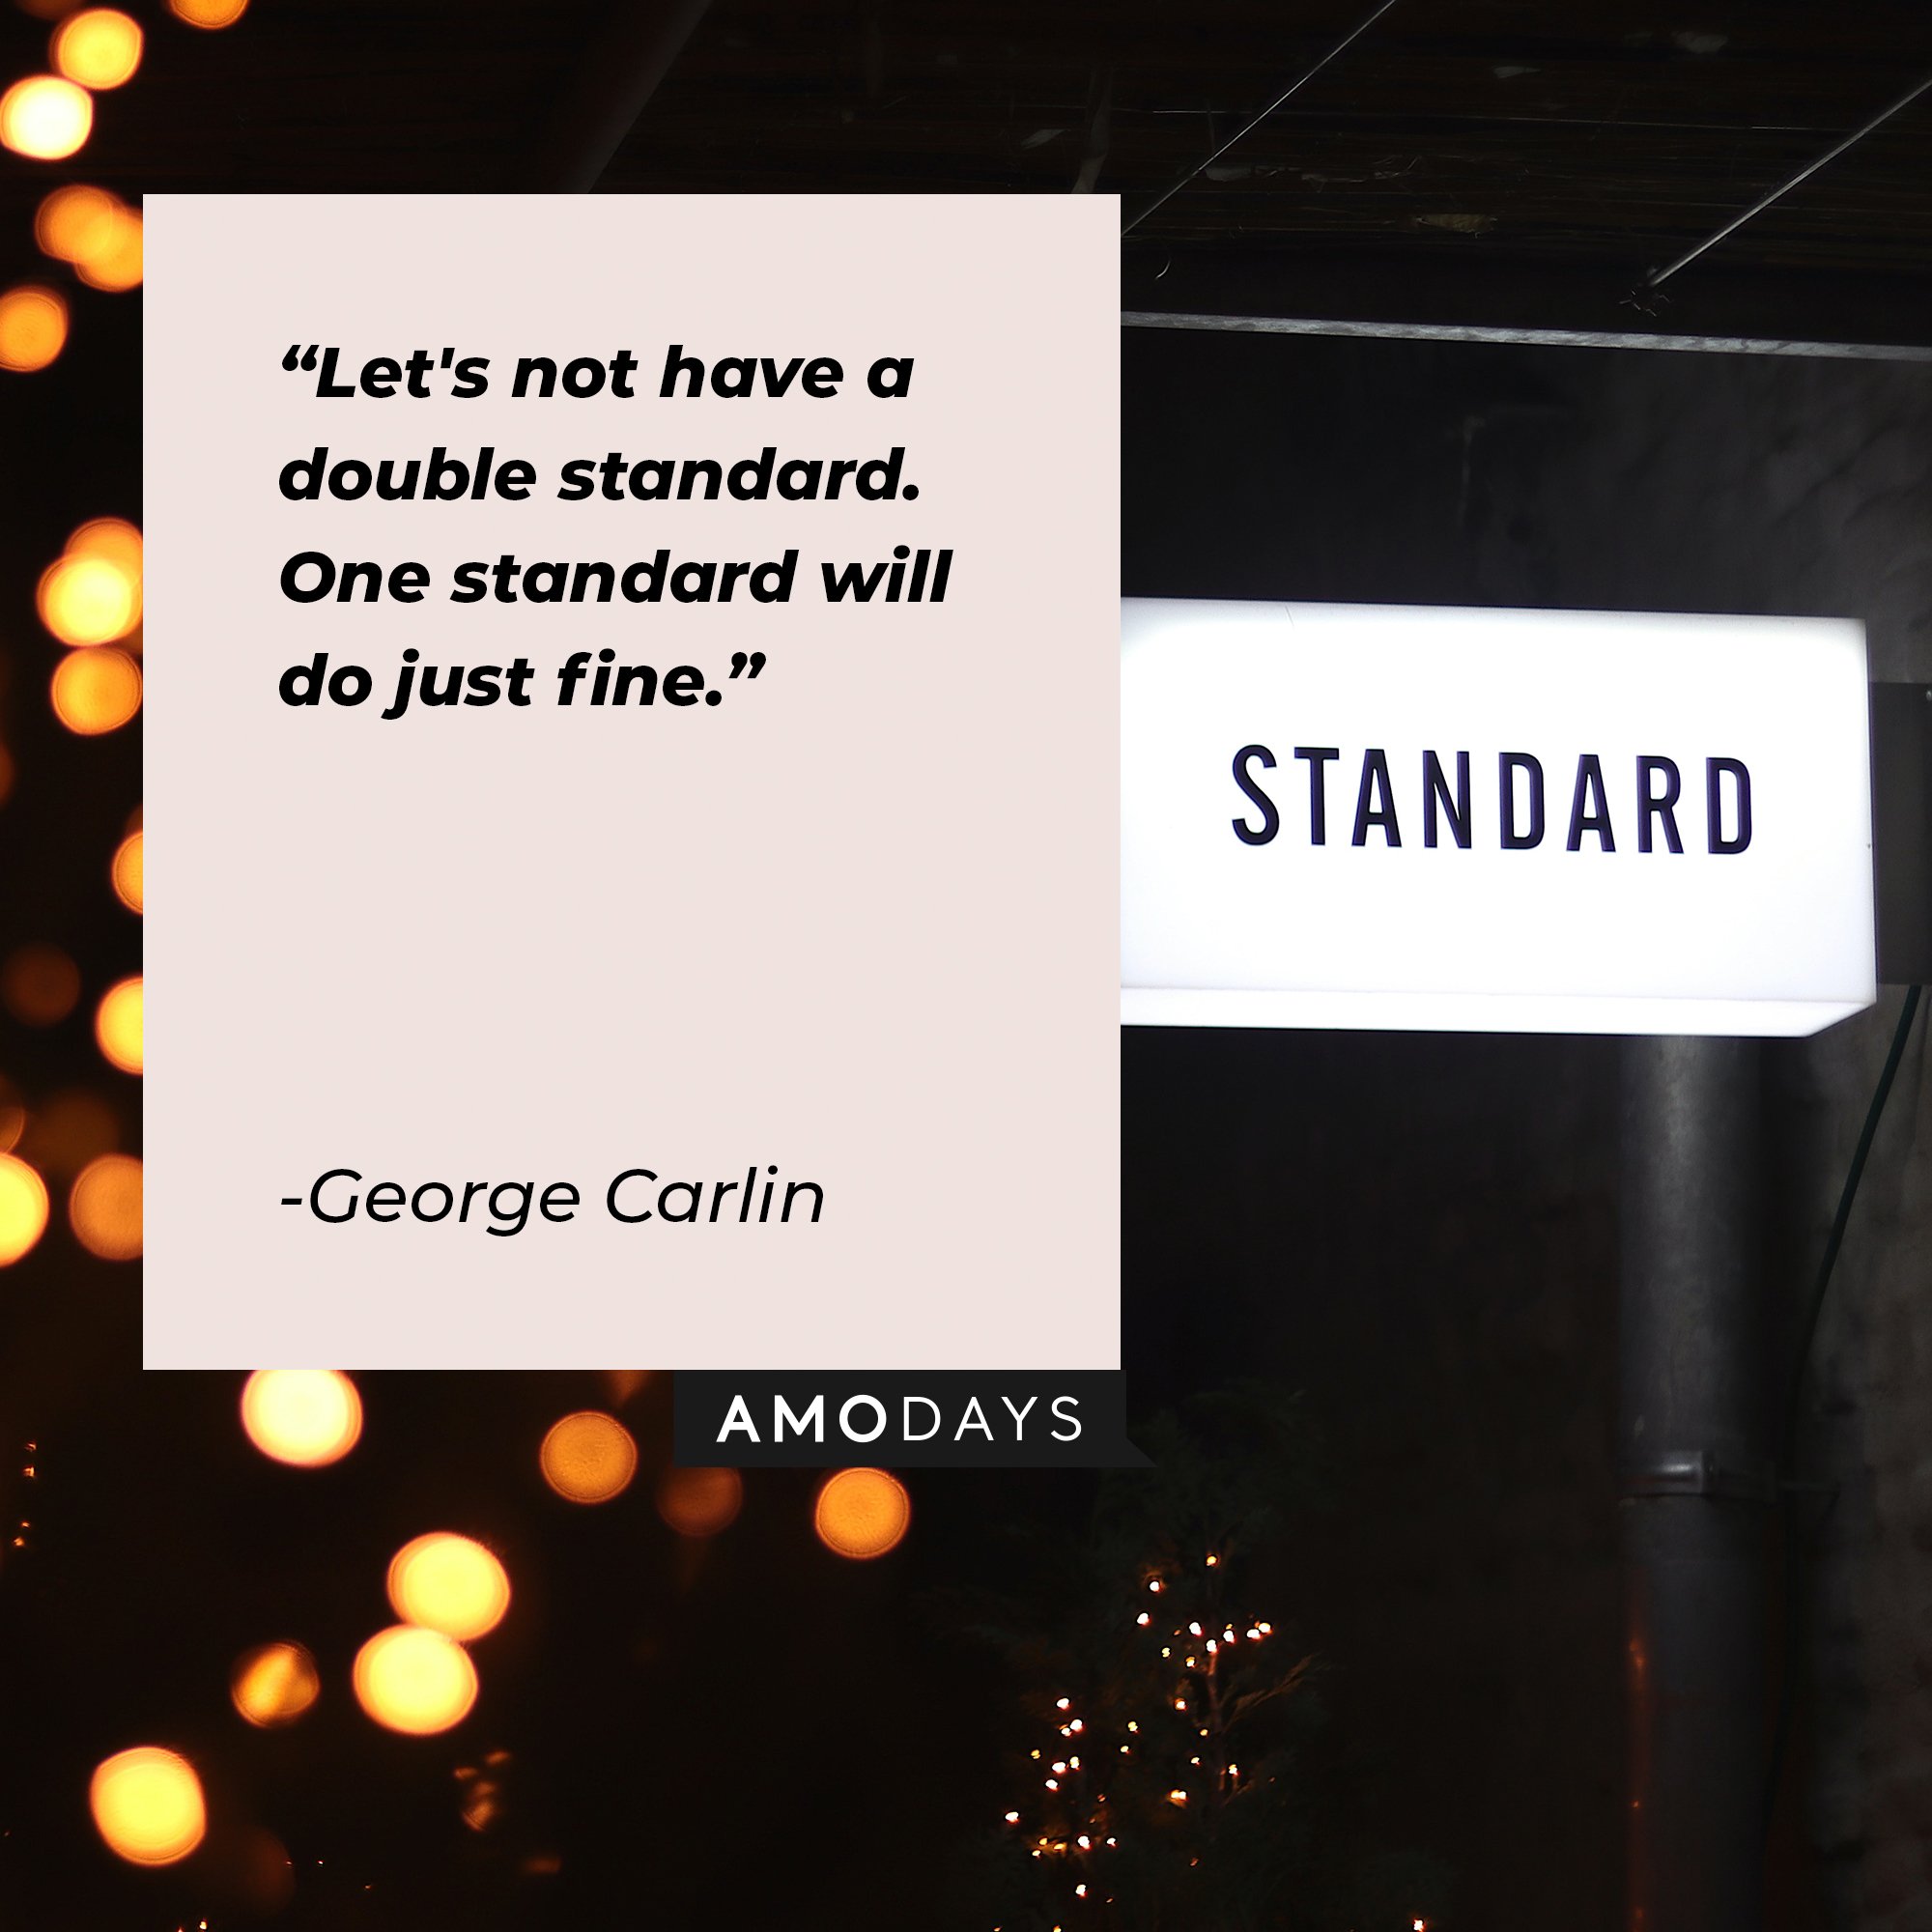 George Carlin’s quote: "Let's not have a double standard. One standard will do just fine." | Image: AmoDays